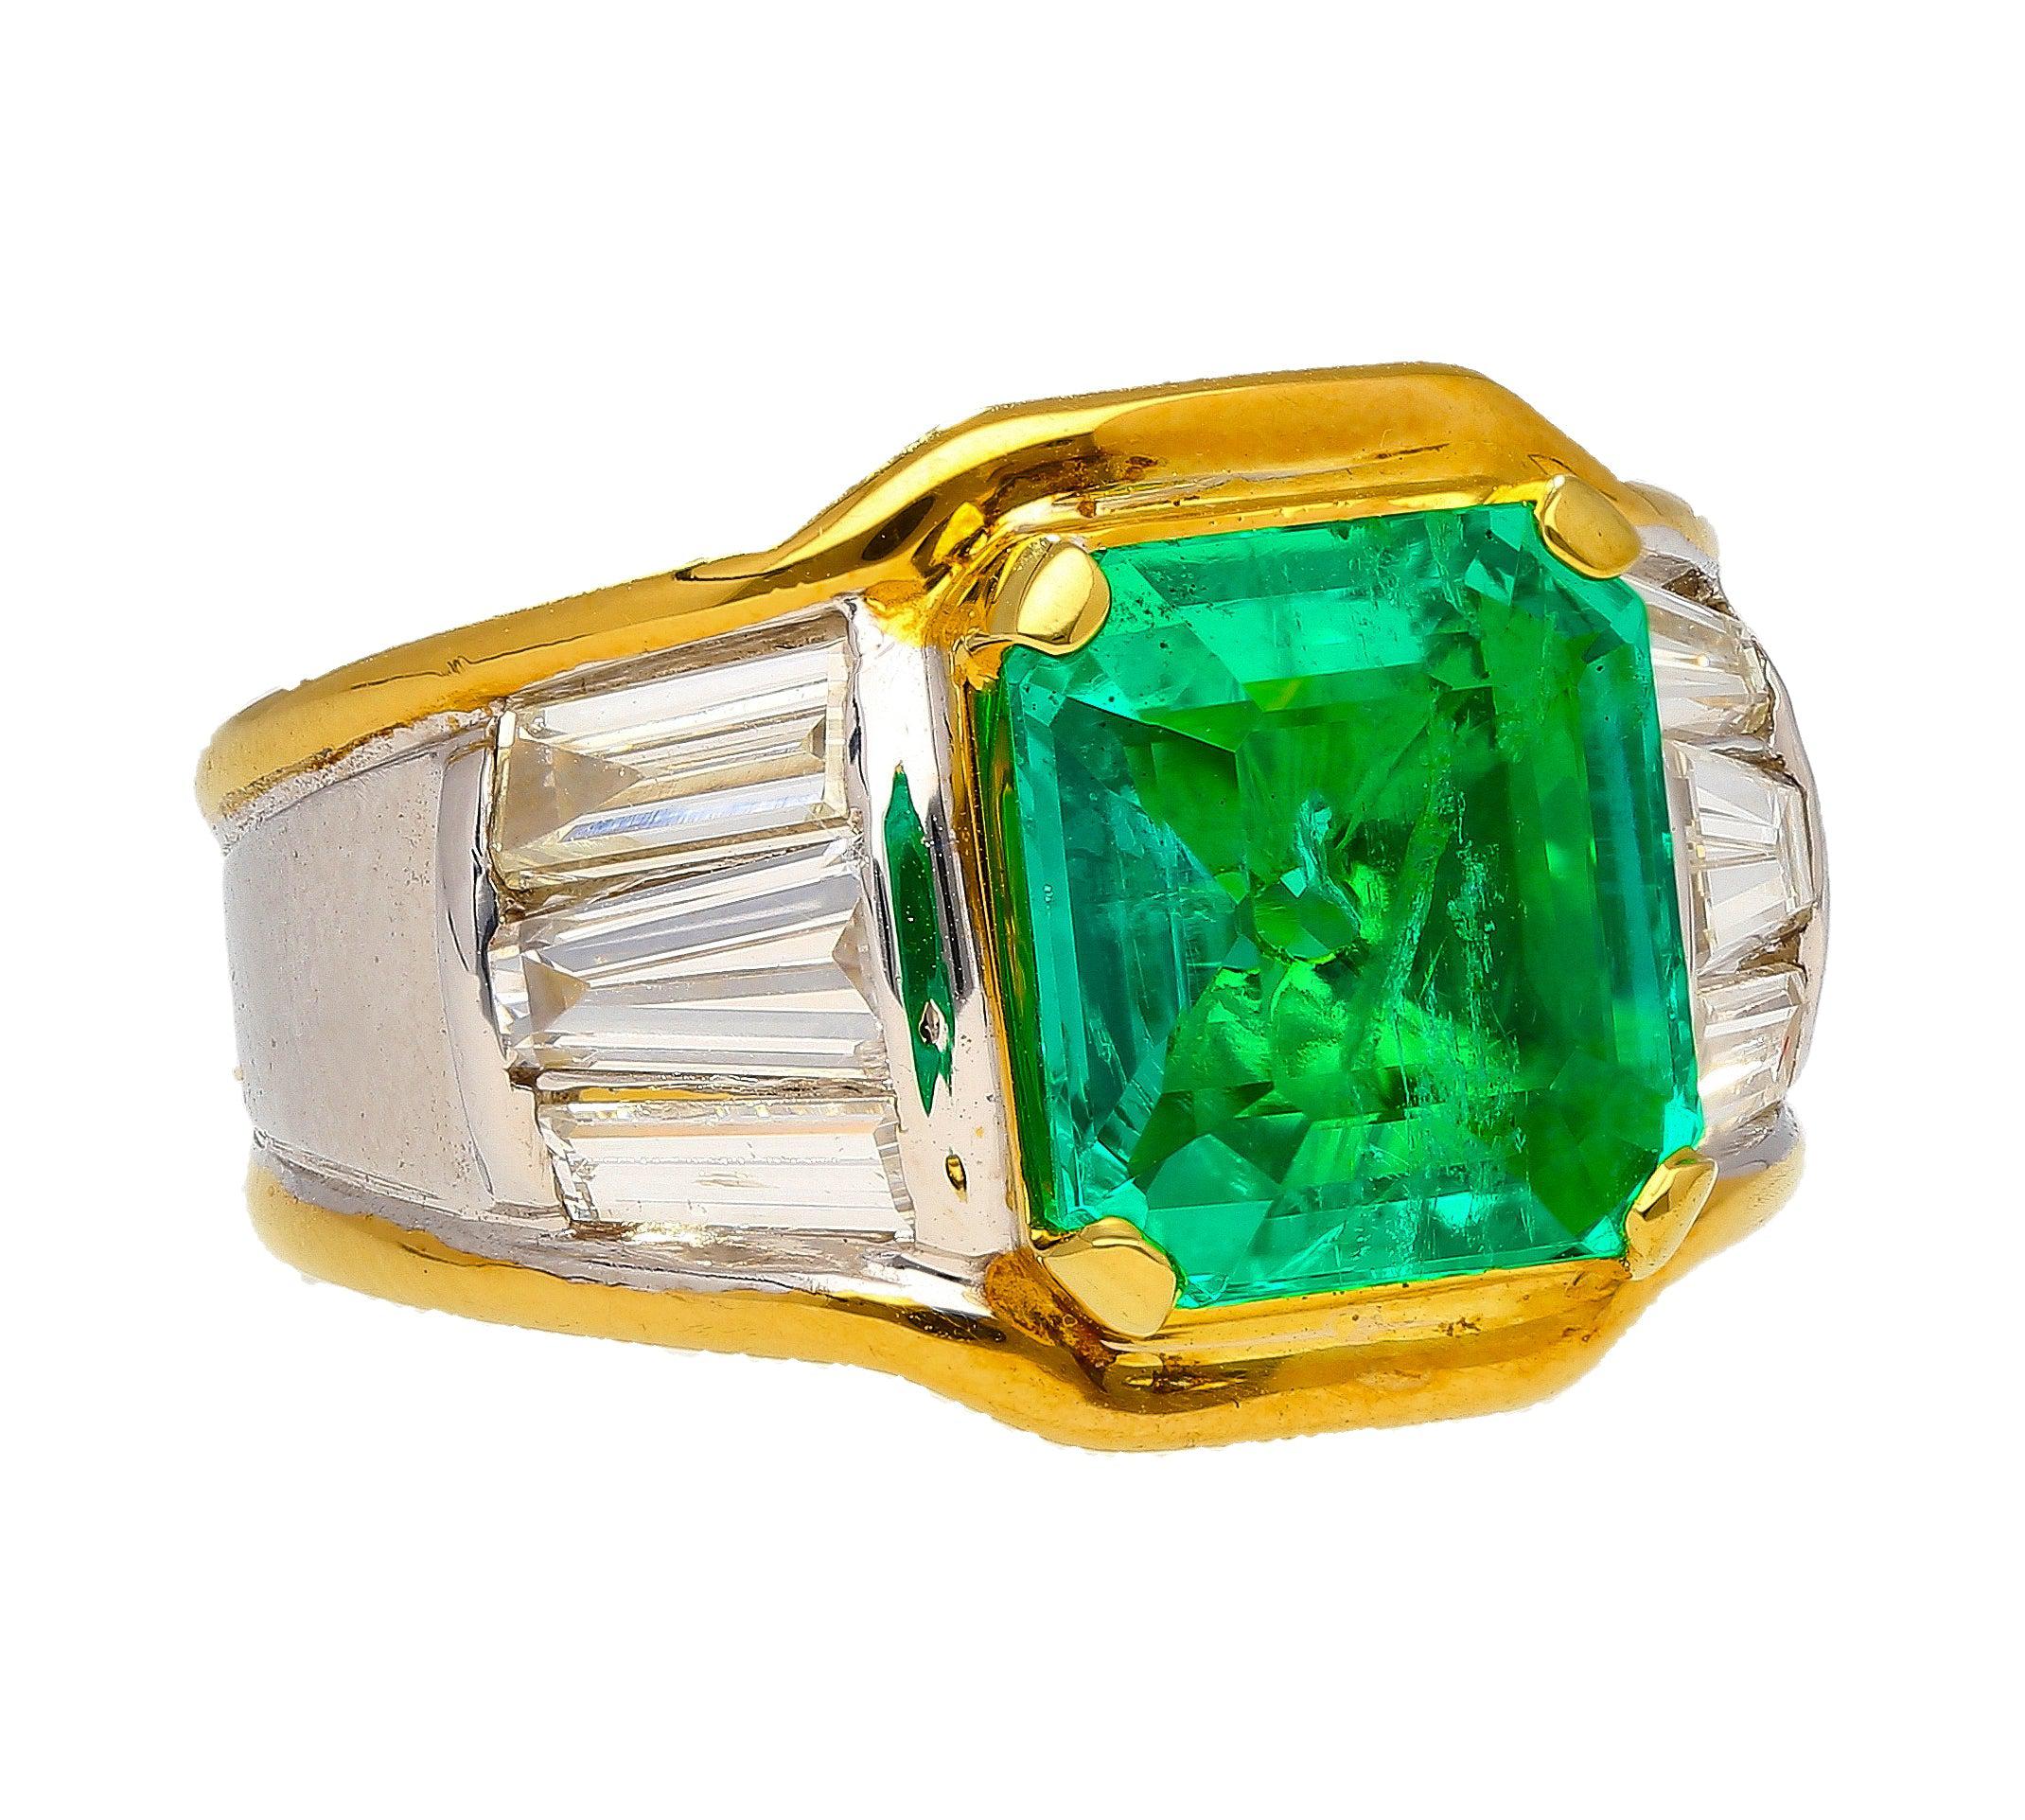 3_16-Carat-Colombian-Emerald-Insignificant-Oil-Unisex-Ring-in-Platinum-18K-Gold-Rings-2.jpg